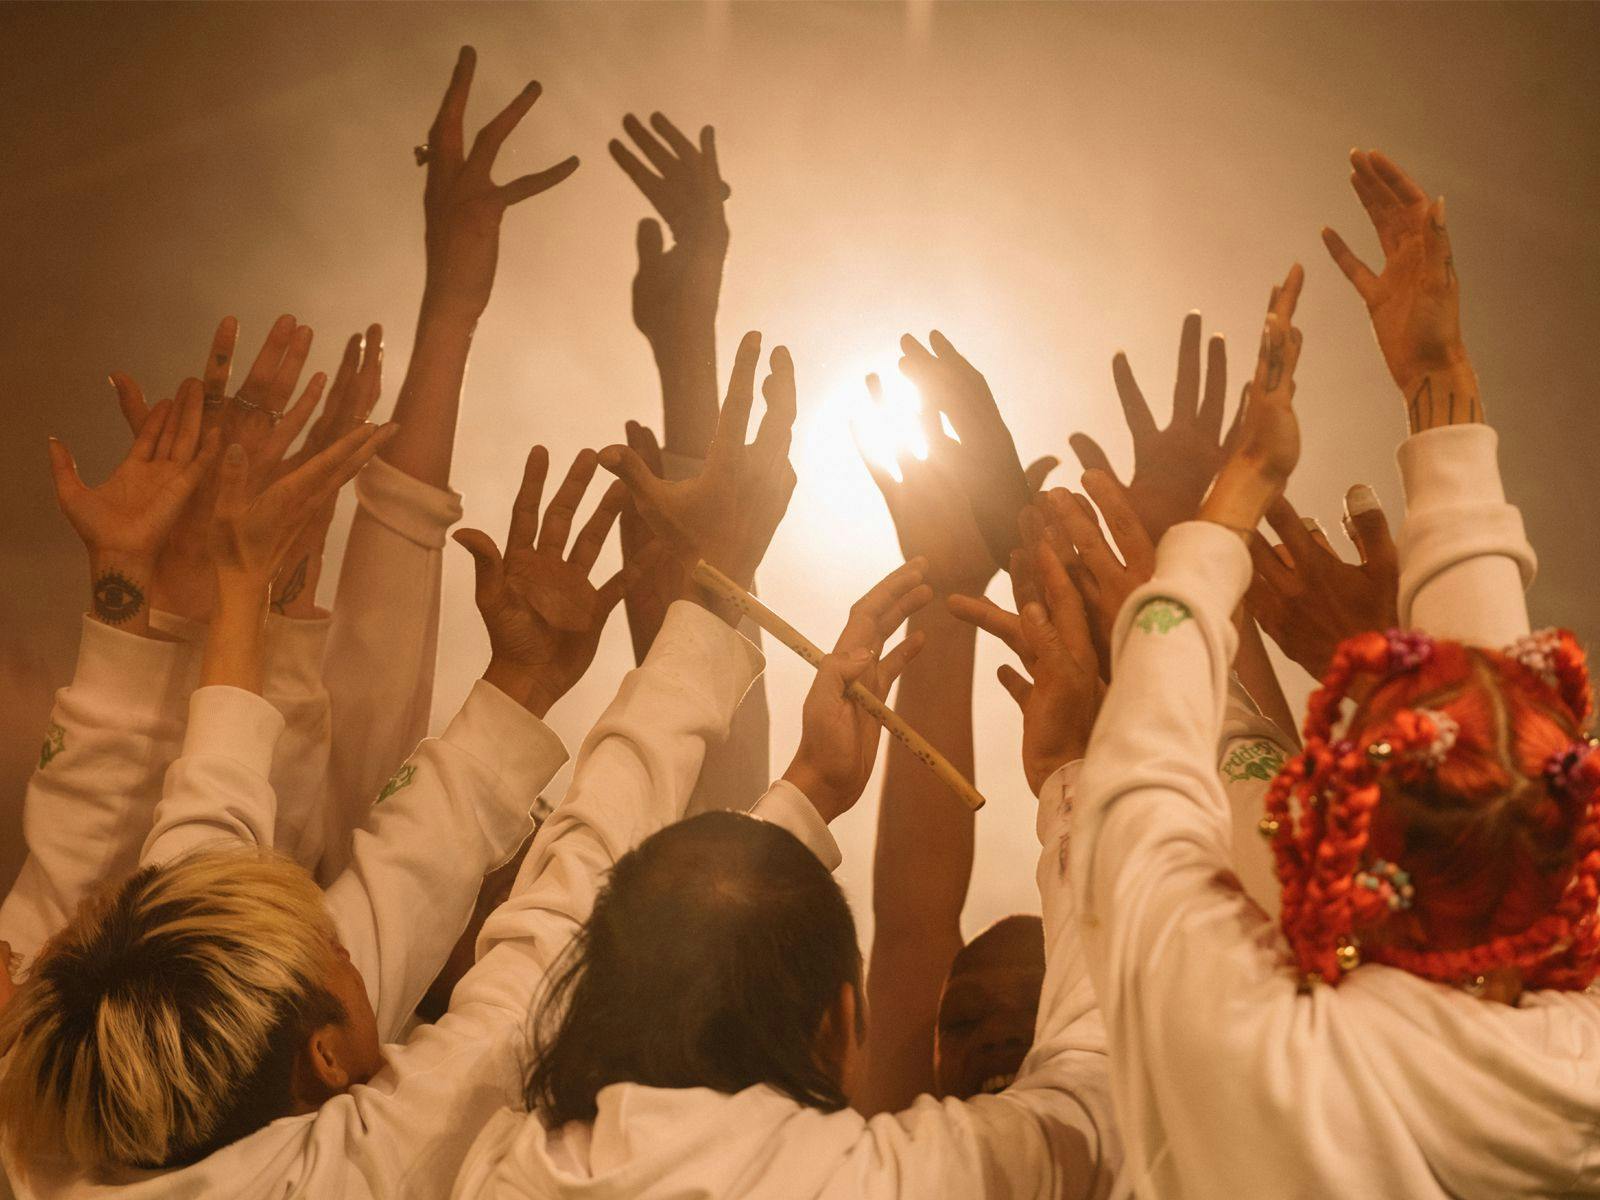 Several people hold their arms in the air up to a bright yellow light.